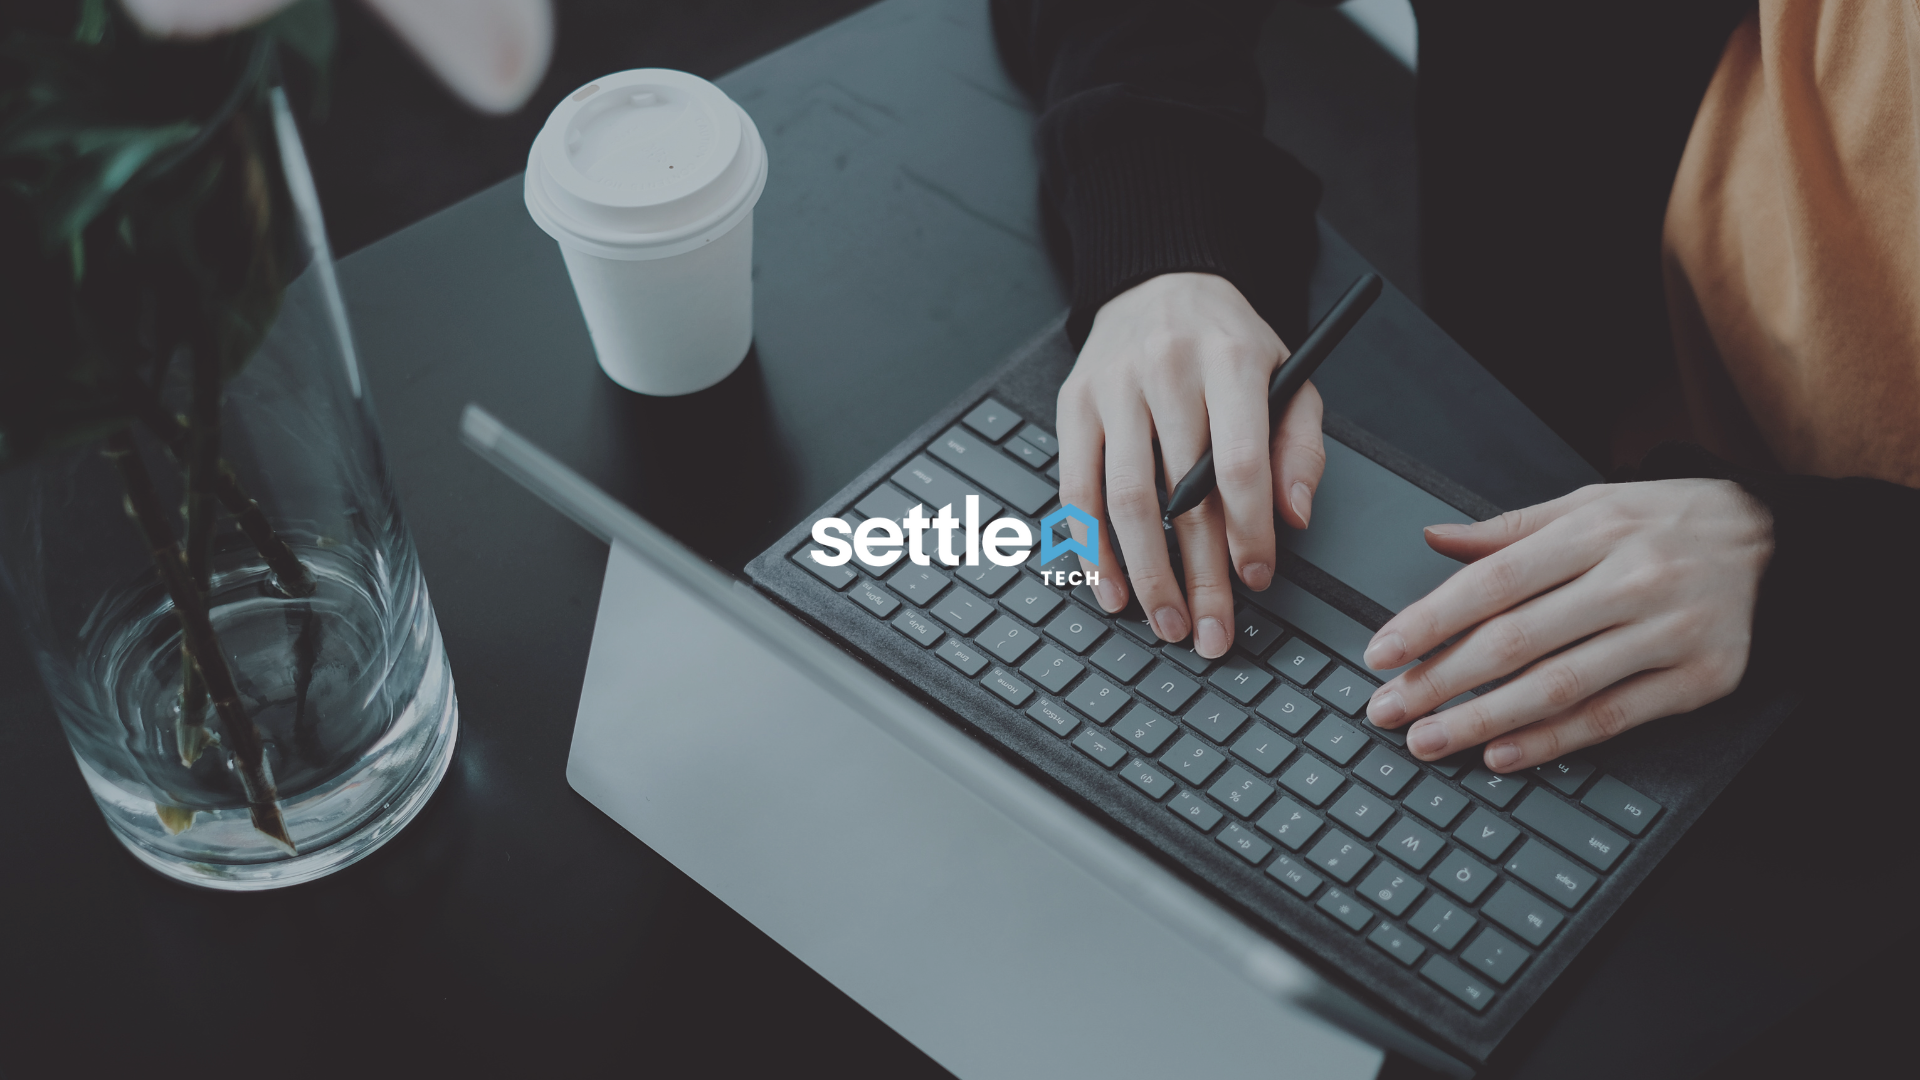 What is SettleTech